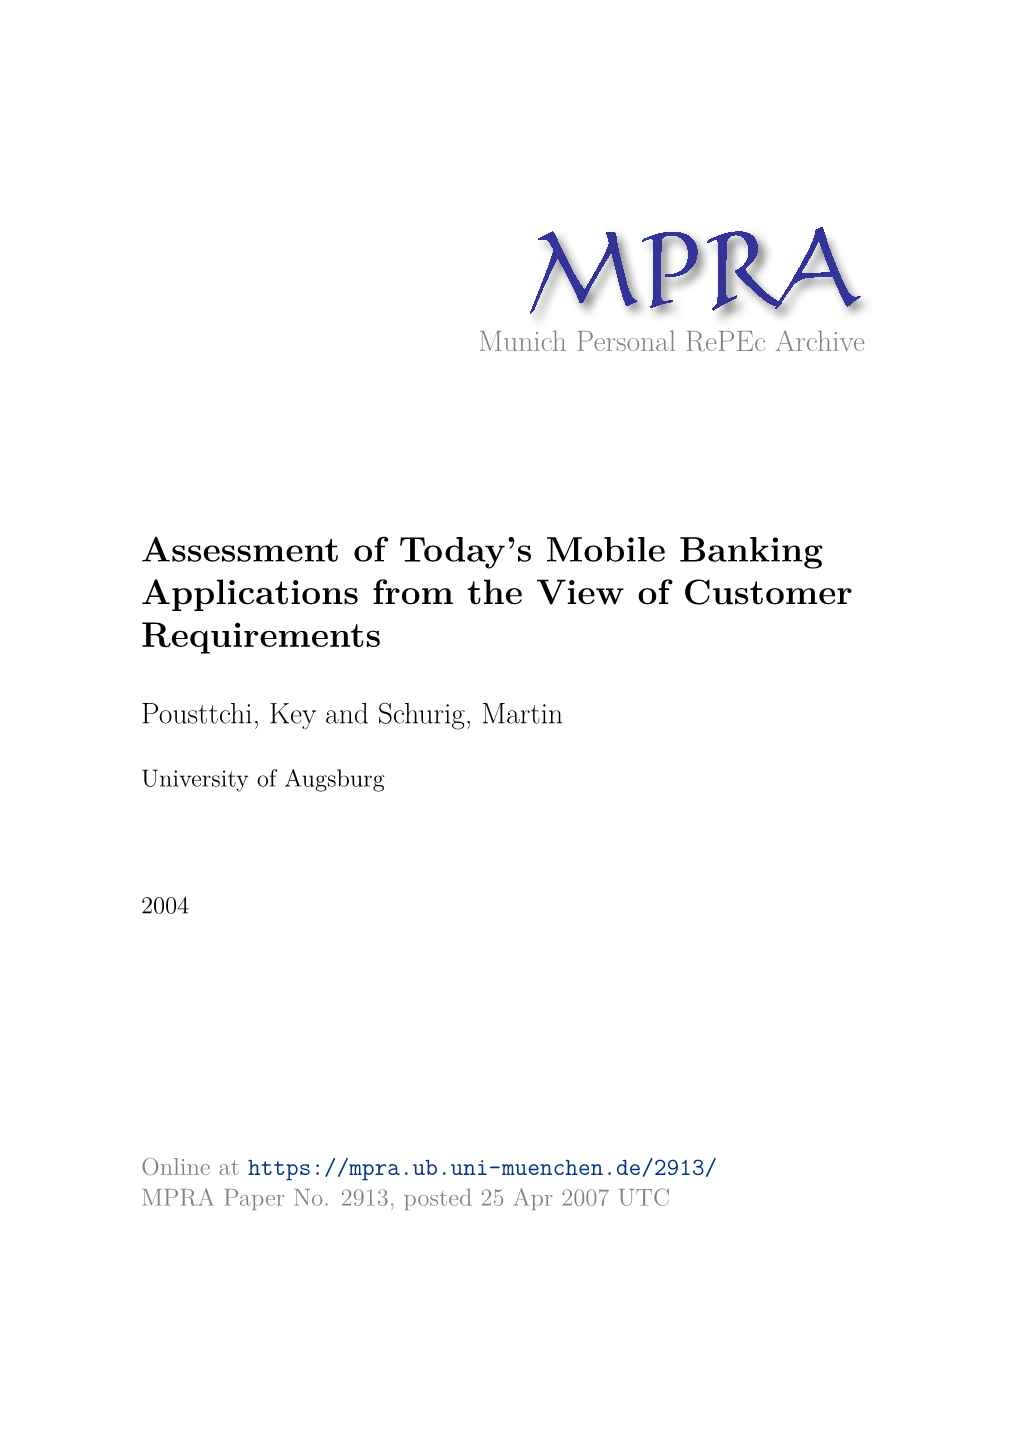 Assessment of Today's Mobile Banking Applications from the View